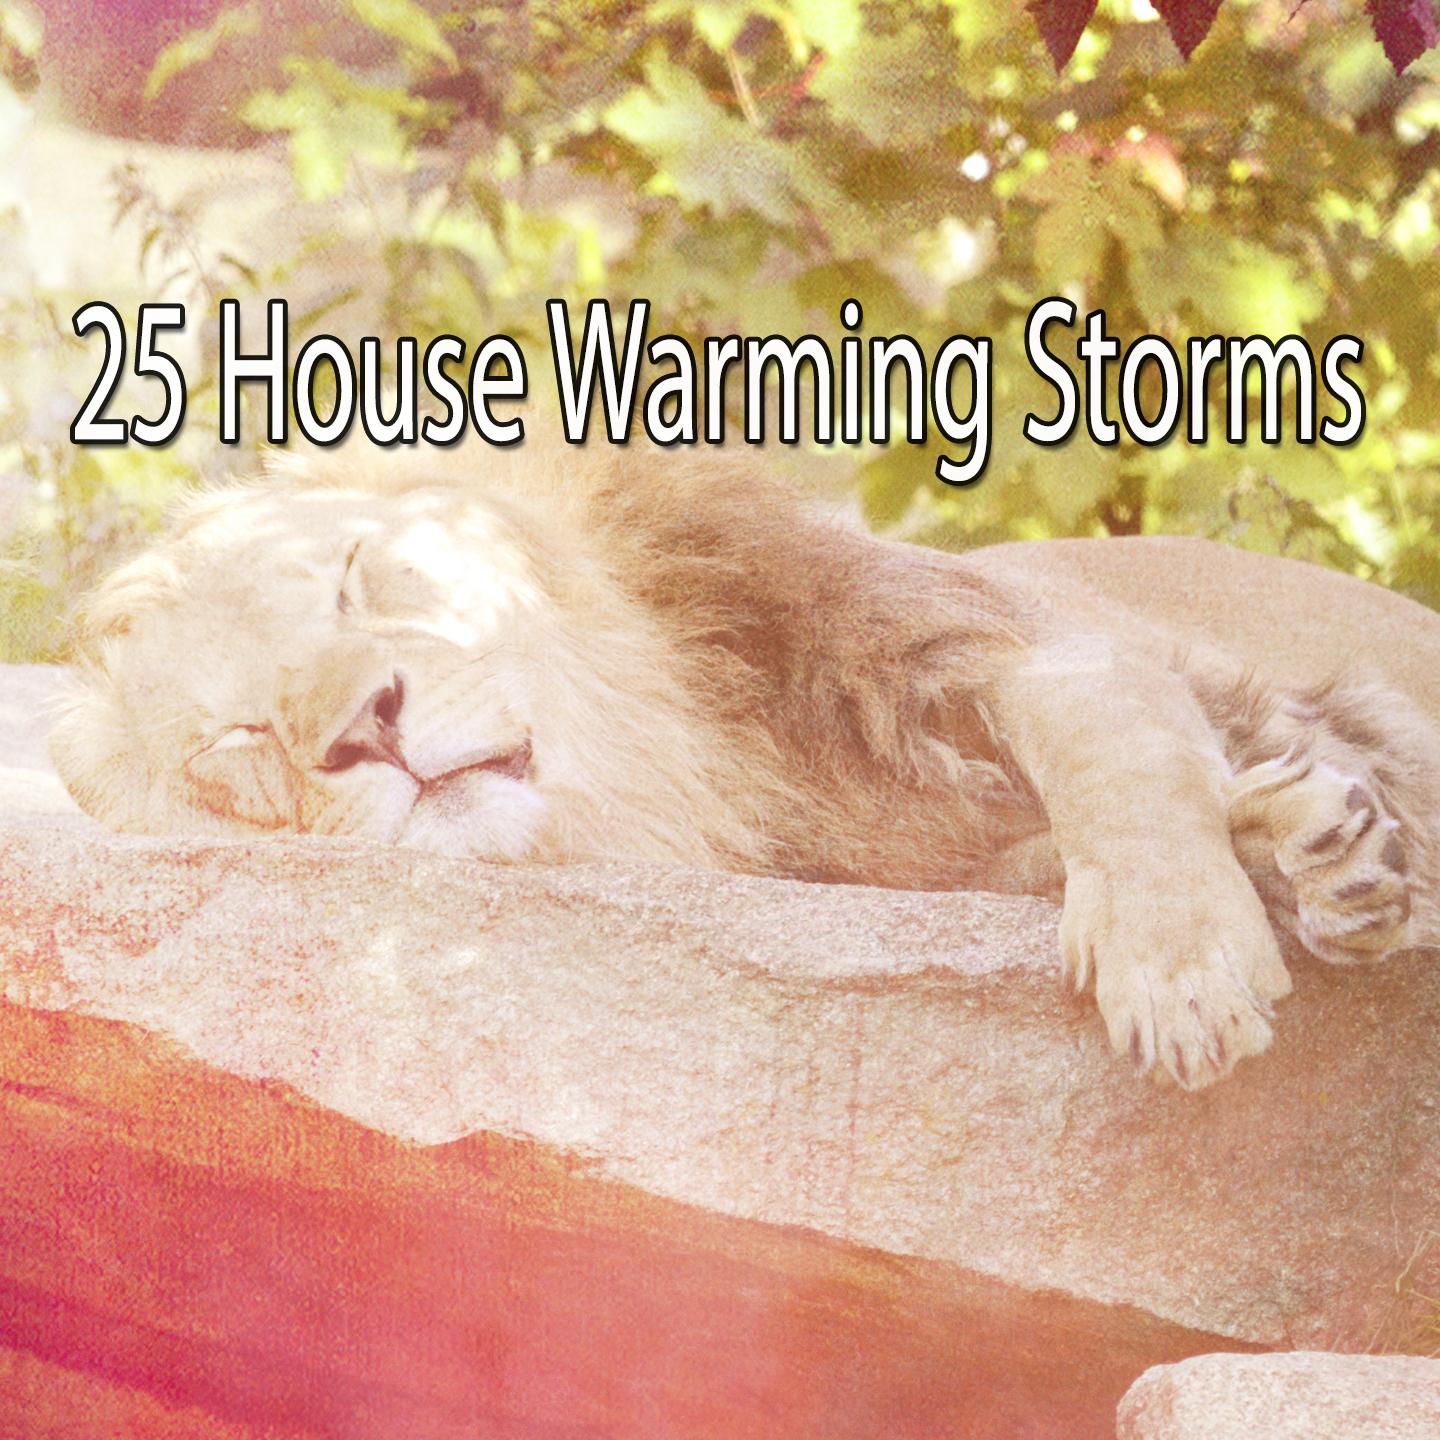 25 House Warming Storms